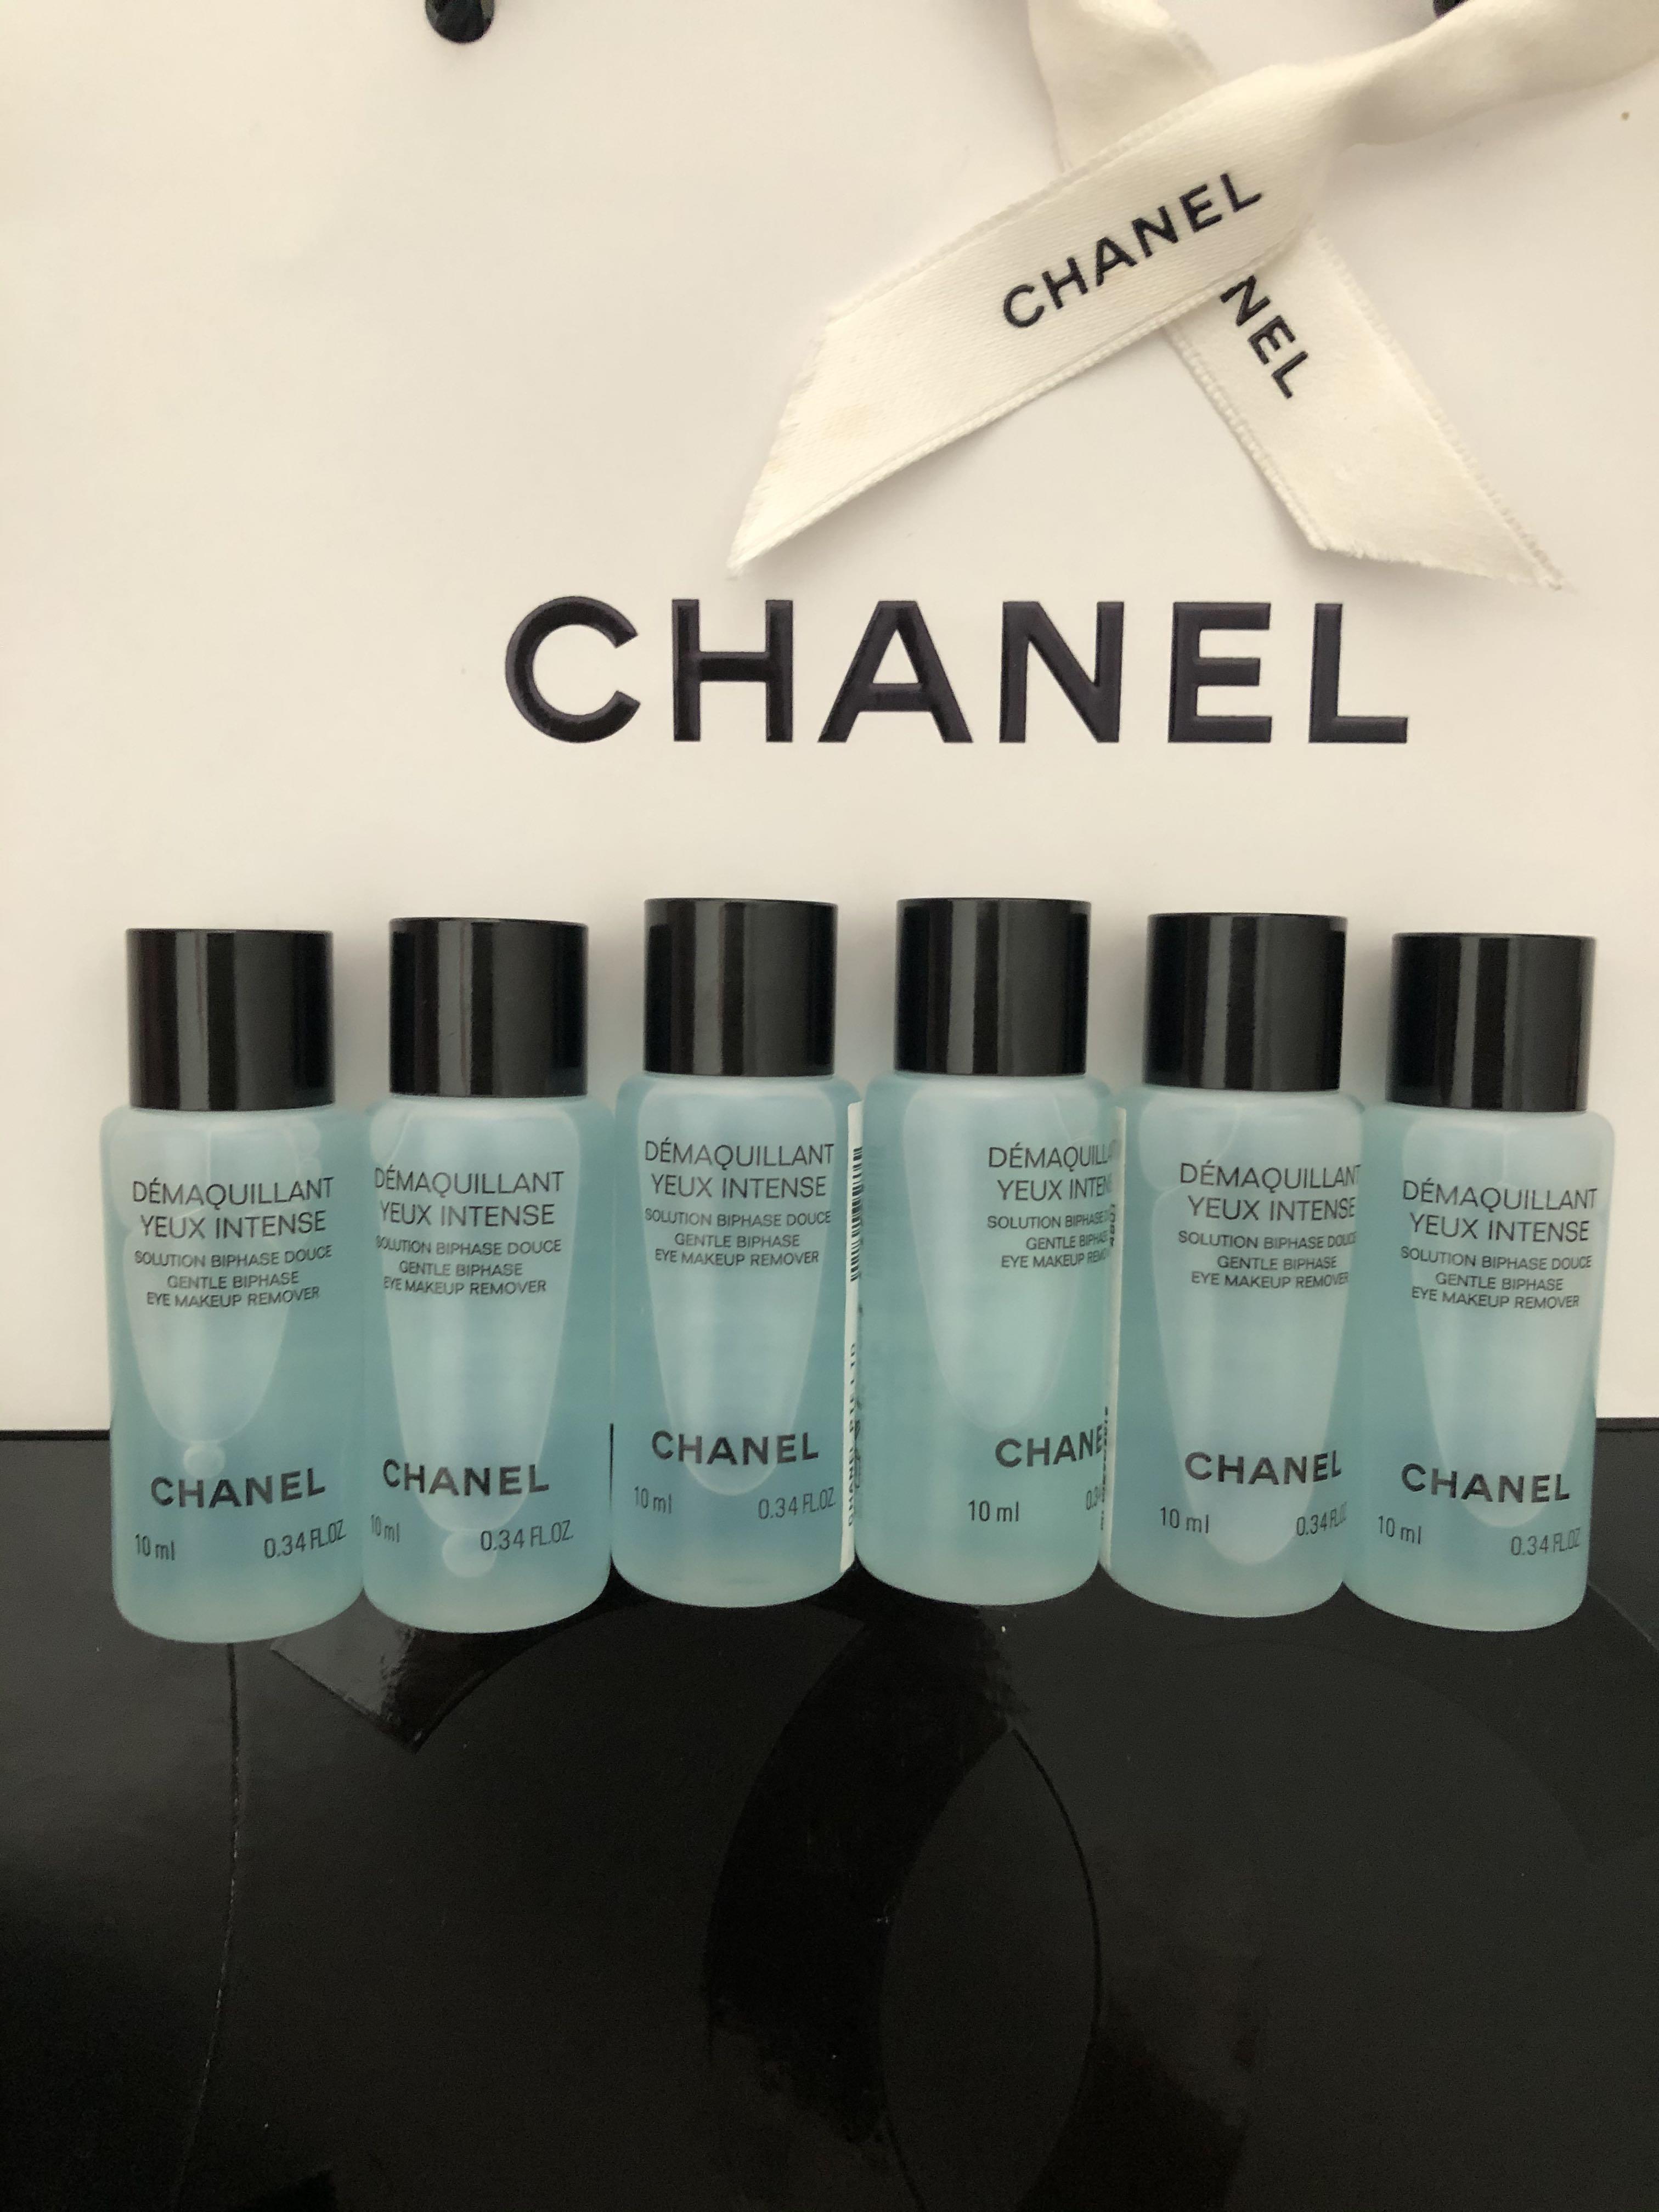 Chanel Demaquillant Yeux Intense Gentle Biphase Eye Makeup Remover - Makeup  Remover